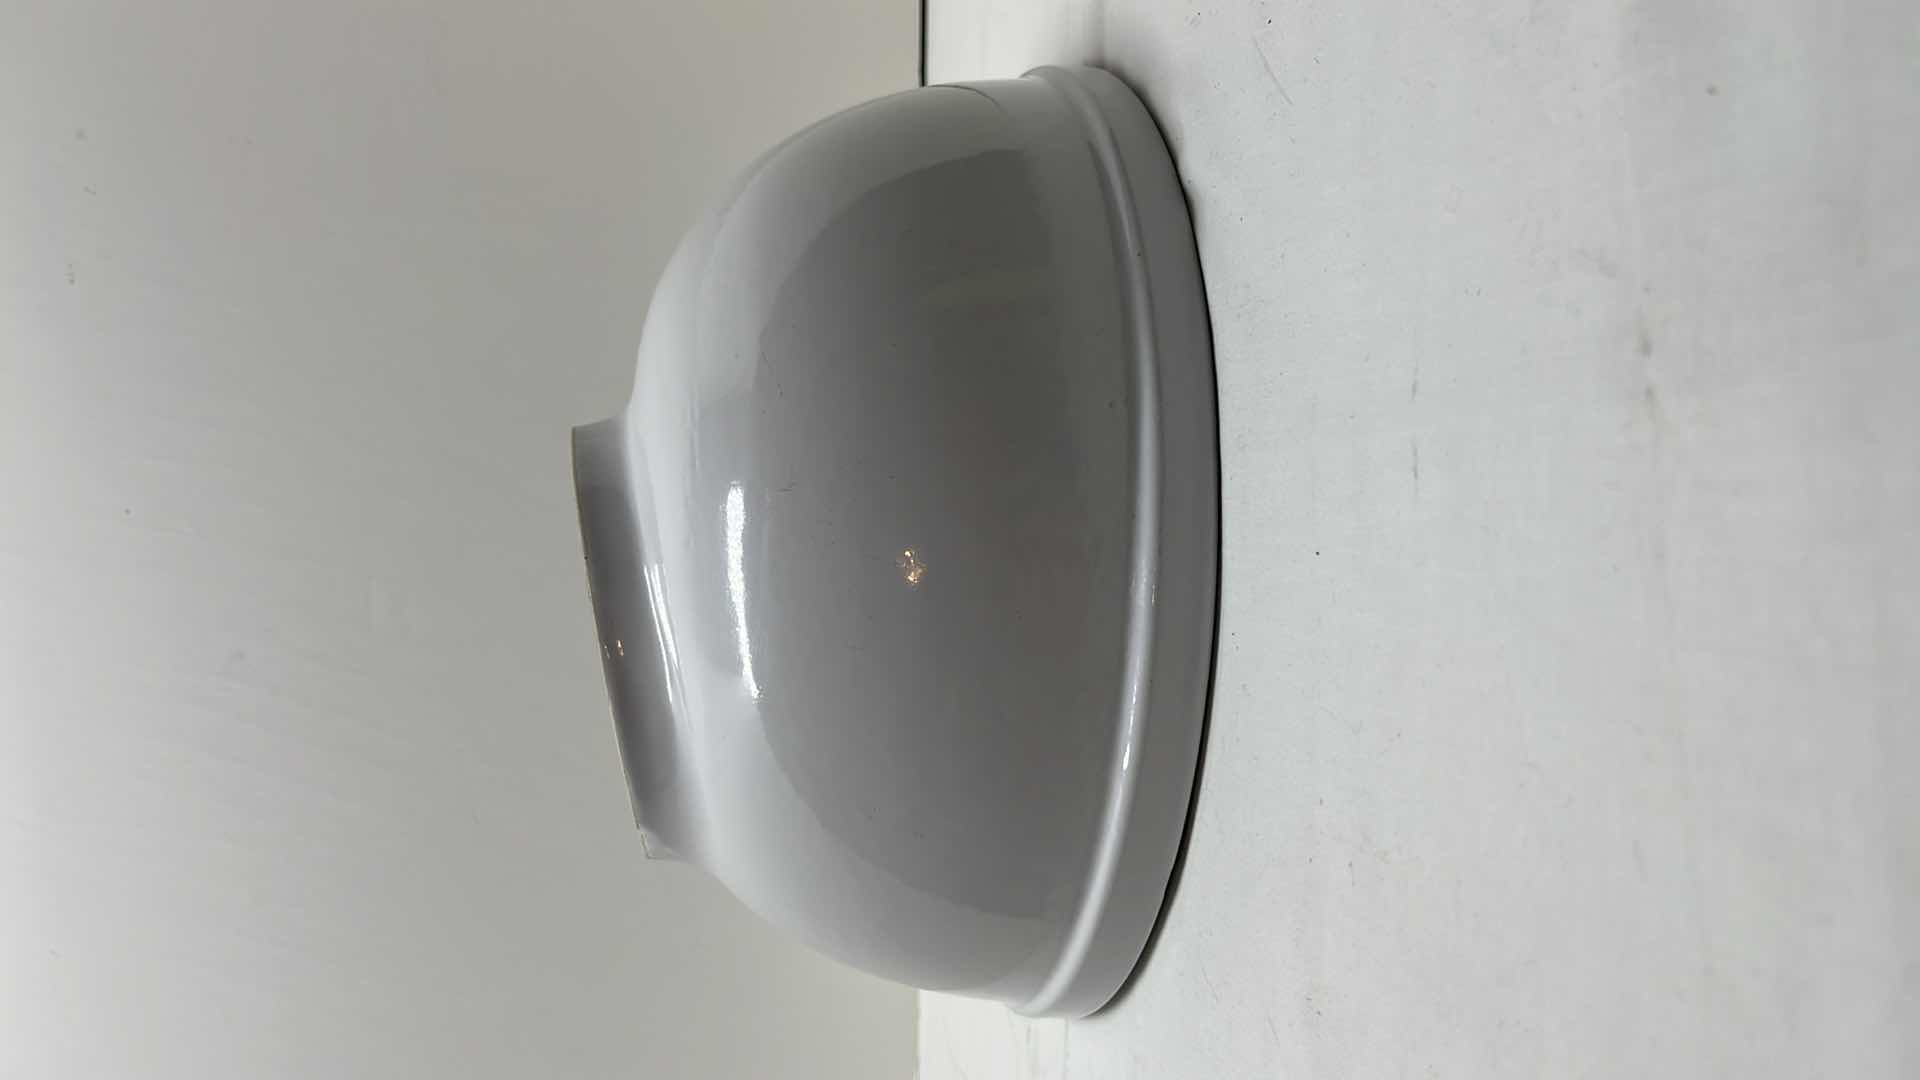 Photo 3 of LARGE CERAMIC OFFSET ROUND BOWL 11.5”D X 7”H & HANDCRAFTED LARGE CLAY POT 10” D X 7.25”H